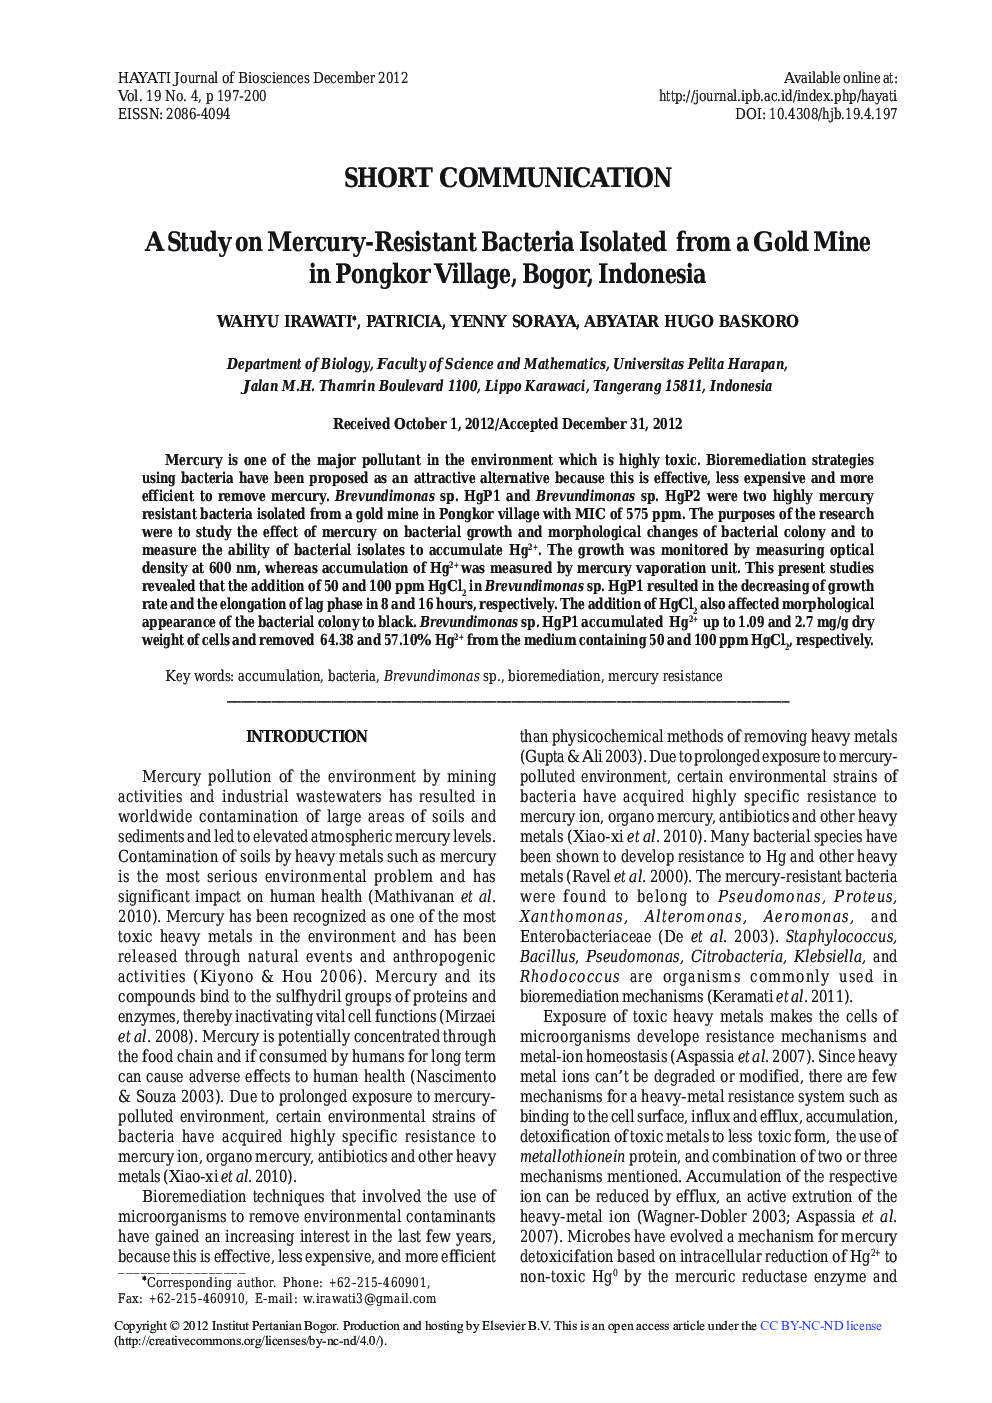 A Study on Mercury-Resistant Bacteria Isolated from a Gold Mine in Pongkor Village, Bogor, Indonesia